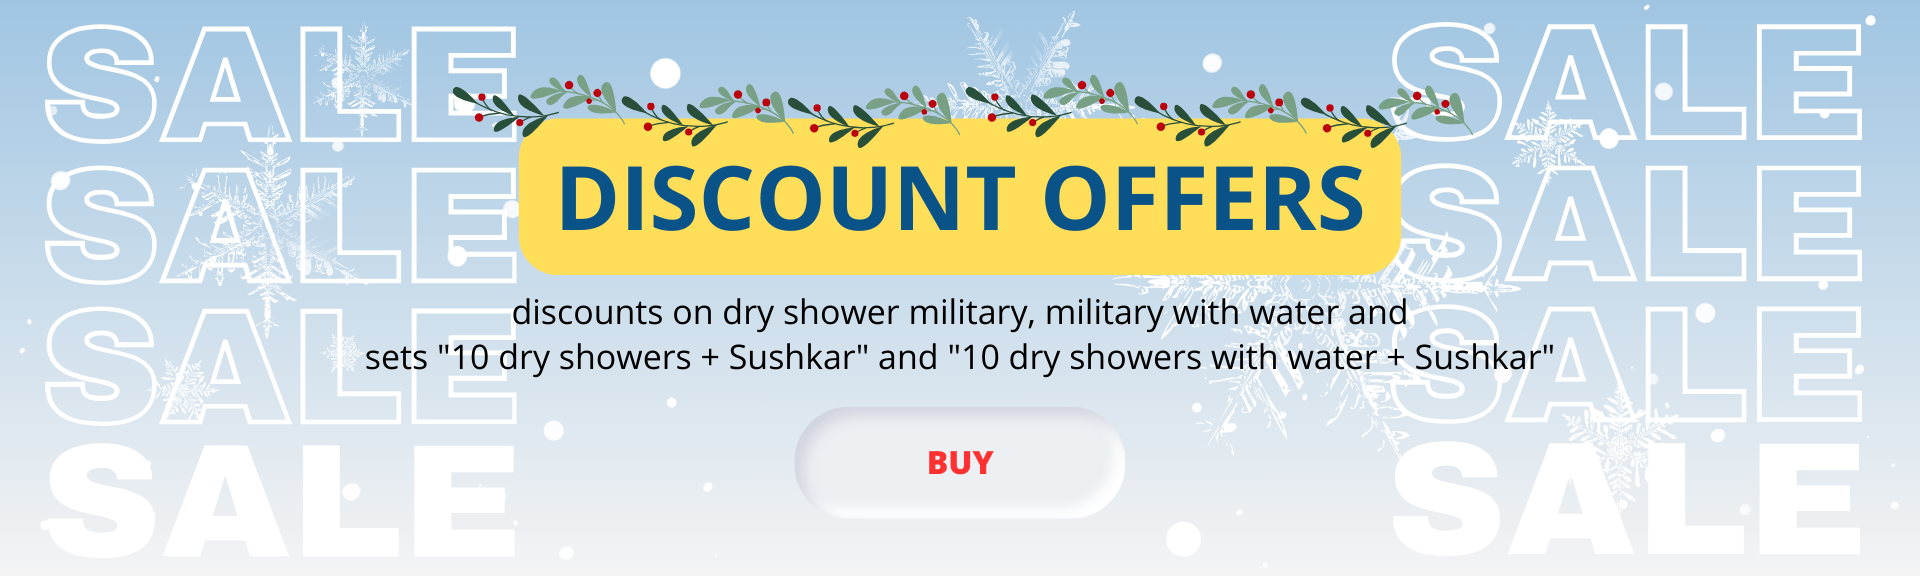 Discounts, promotions, sale SHOWER PACK: military dry shower, with water, Dry sets as a gift